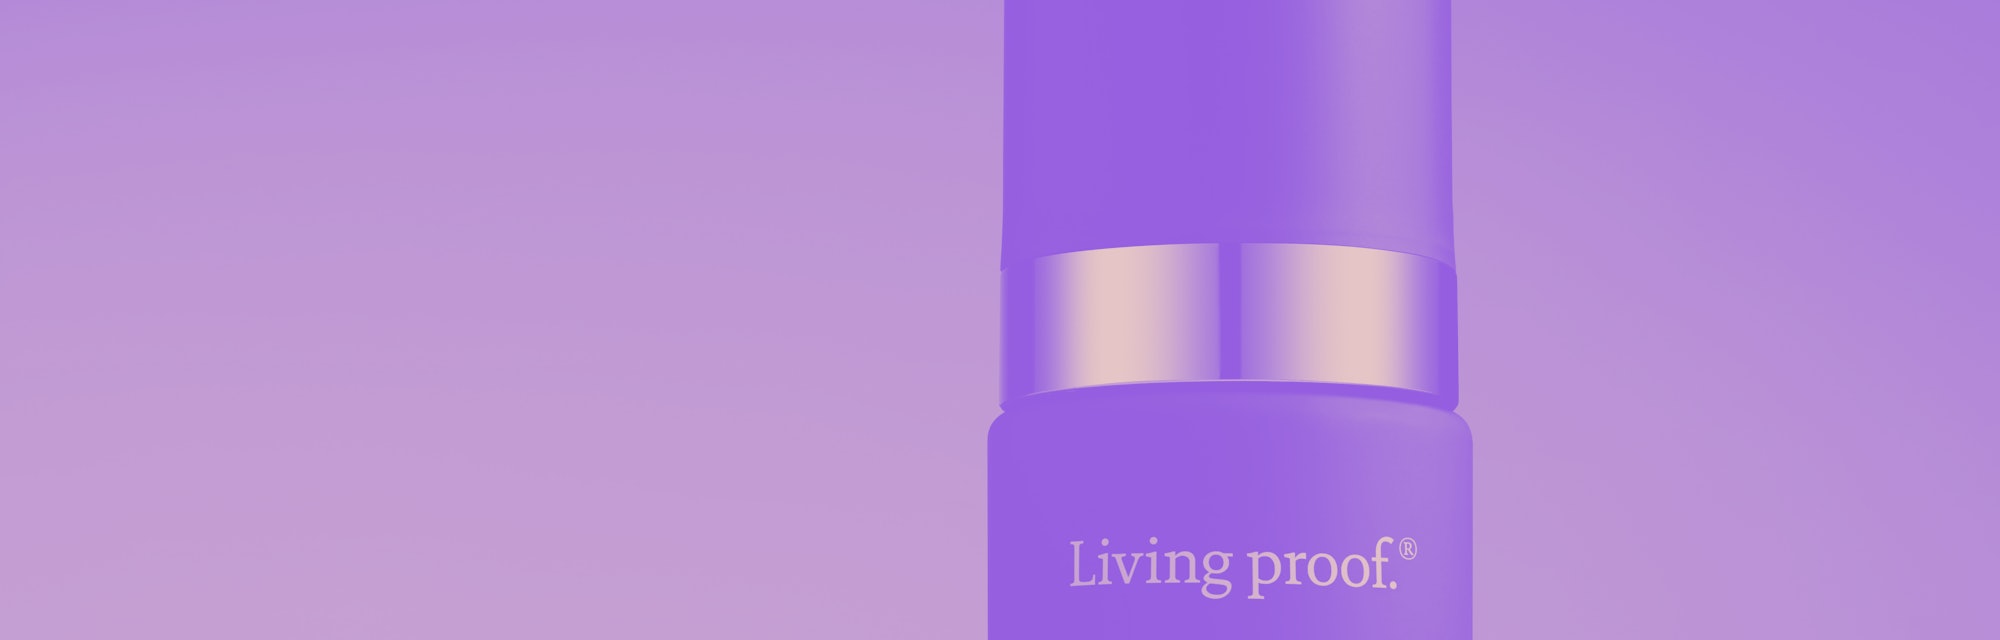  Review of Living Proof’s new Instant hair-repairing treatment